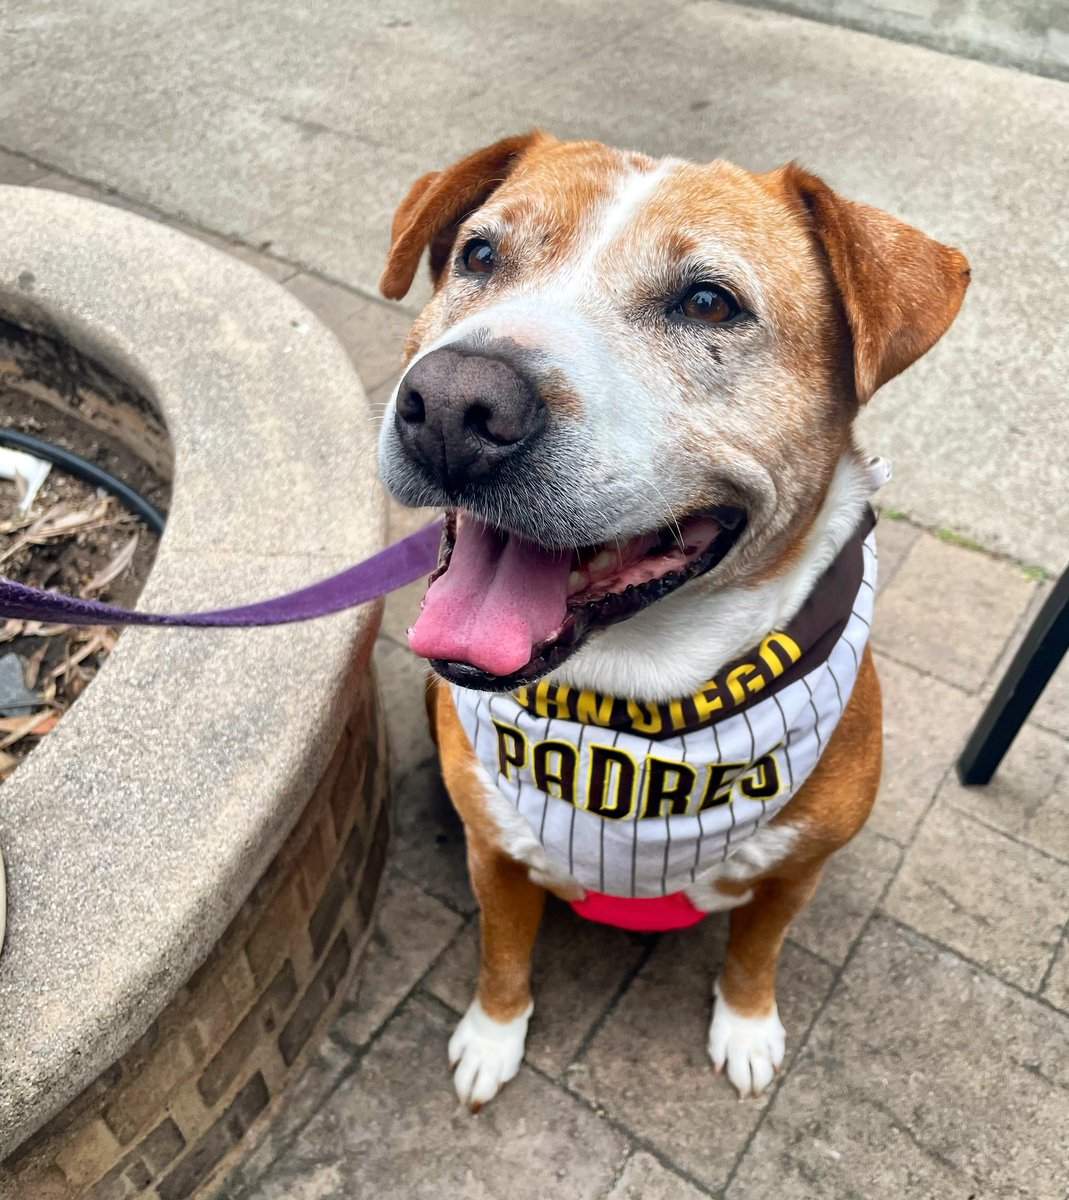 Quibby is ready to cheer on her favorite team! Go Padres!!! #padrespets